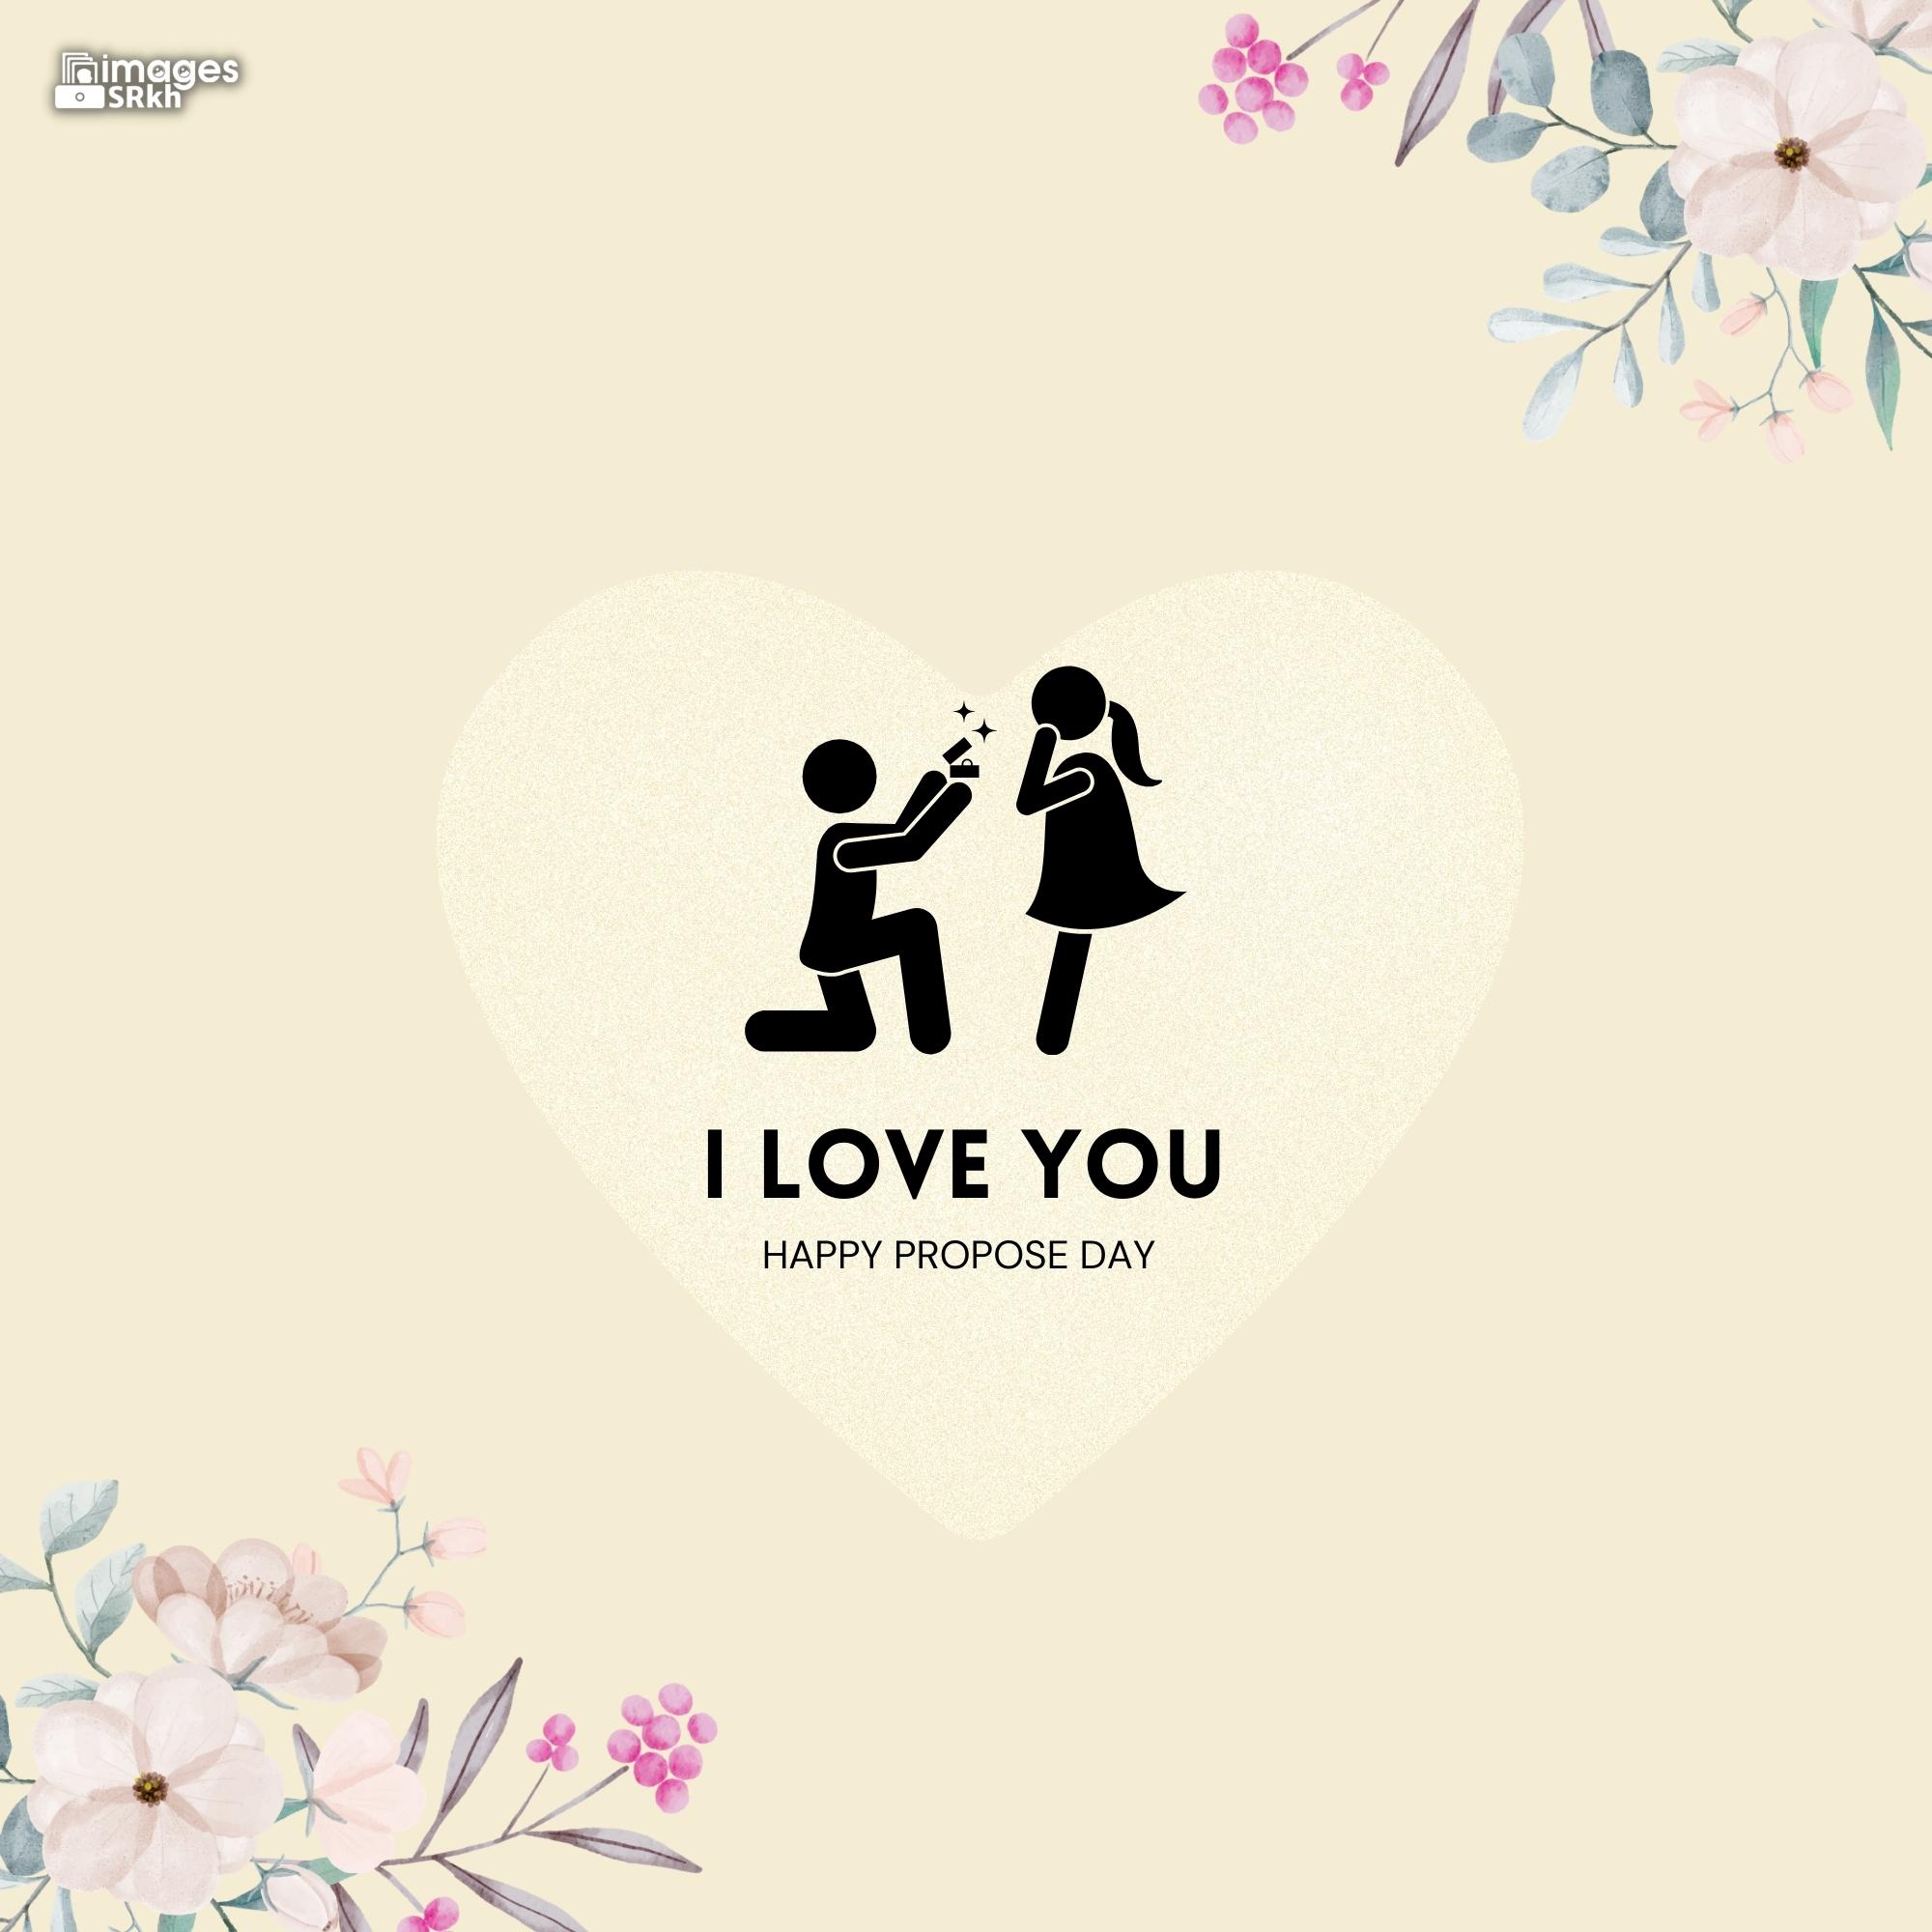 Happy Propose Day Images | 382 | I LOVE YOU